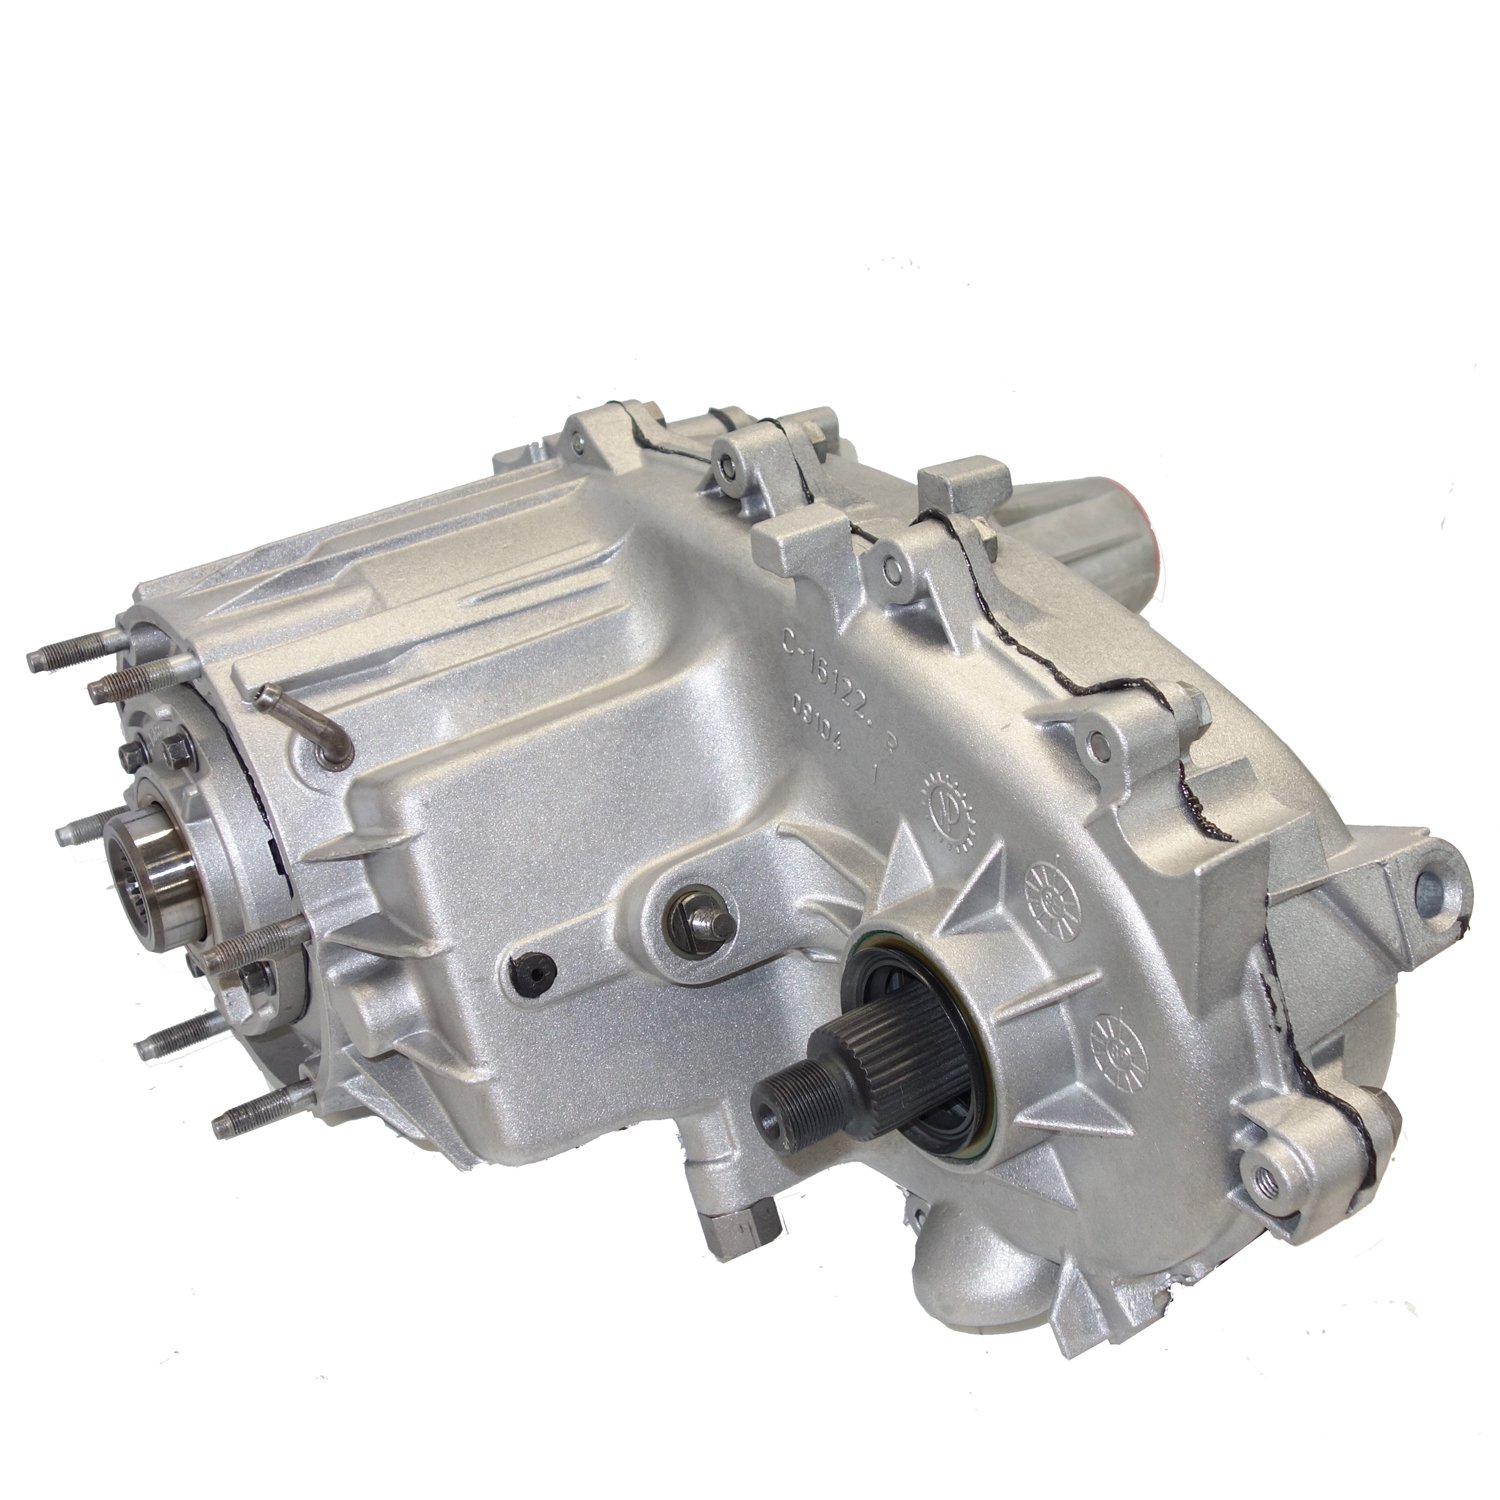 Remanufactured NP242 Transfer Case for Jeep 93-95 Grand